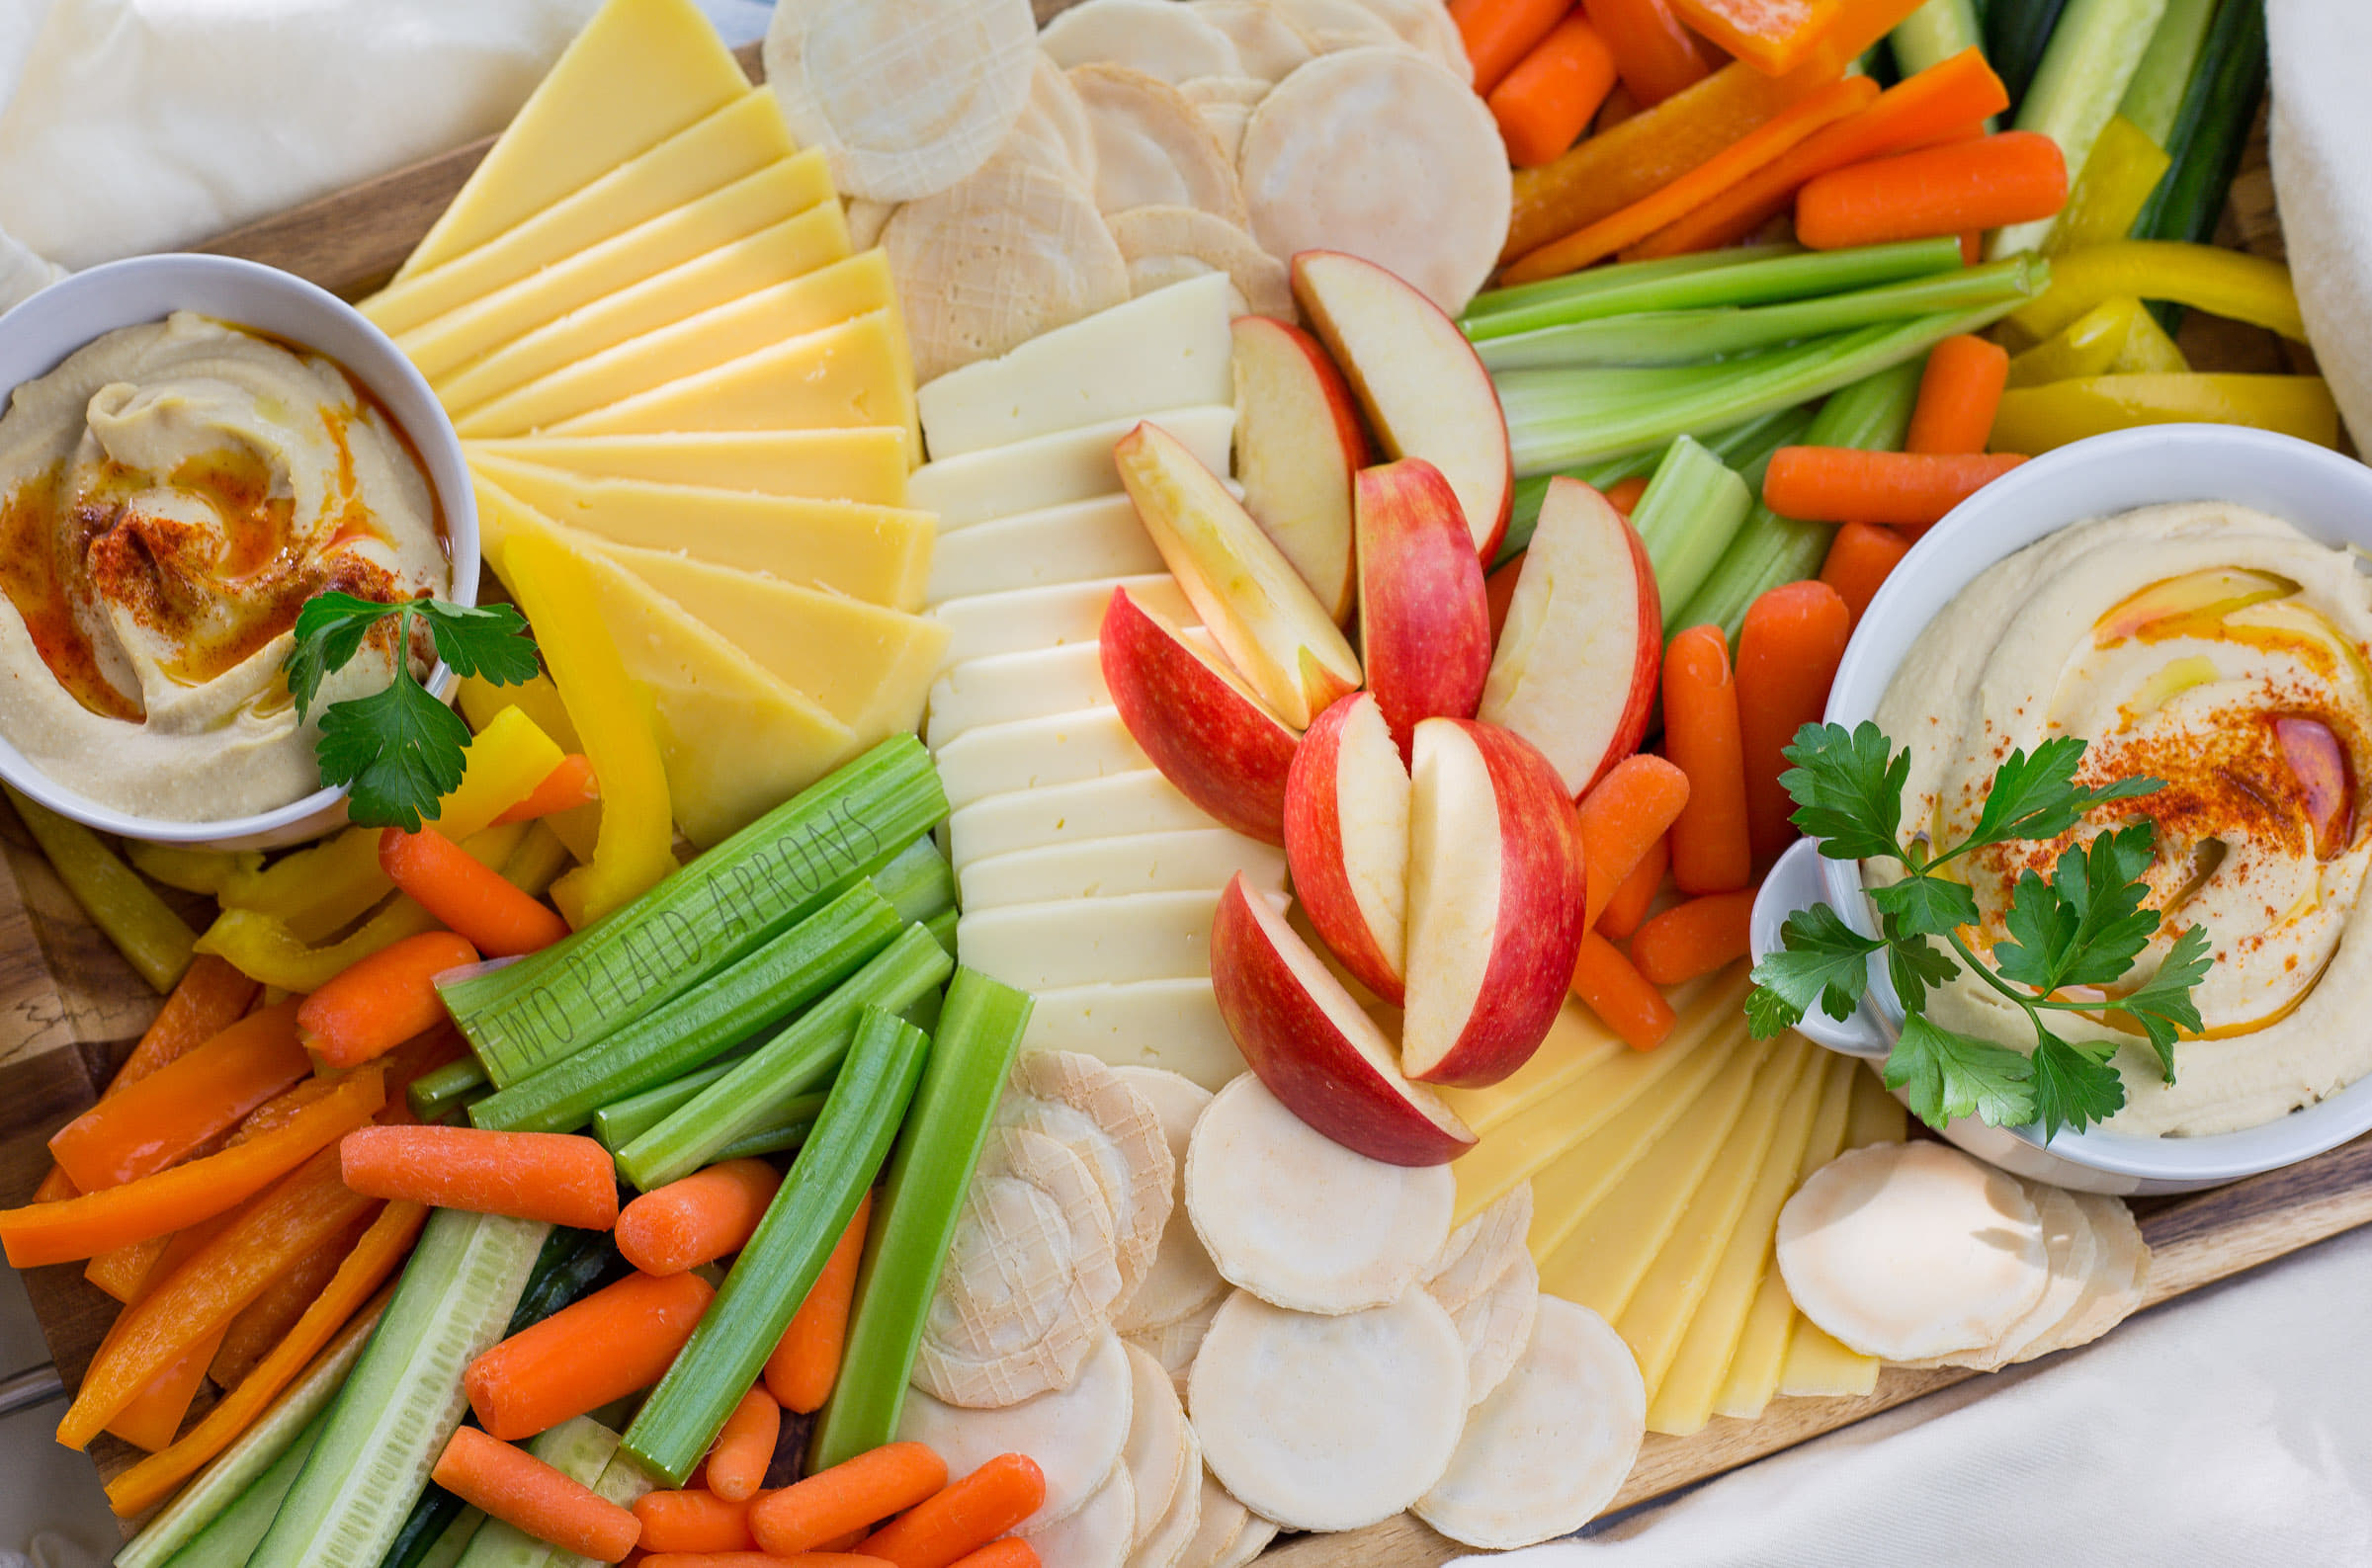 Veggie board filled with two bowls of hummus, cheeses, carrots, celery, cucumber, bell peppers, and rice crackers.